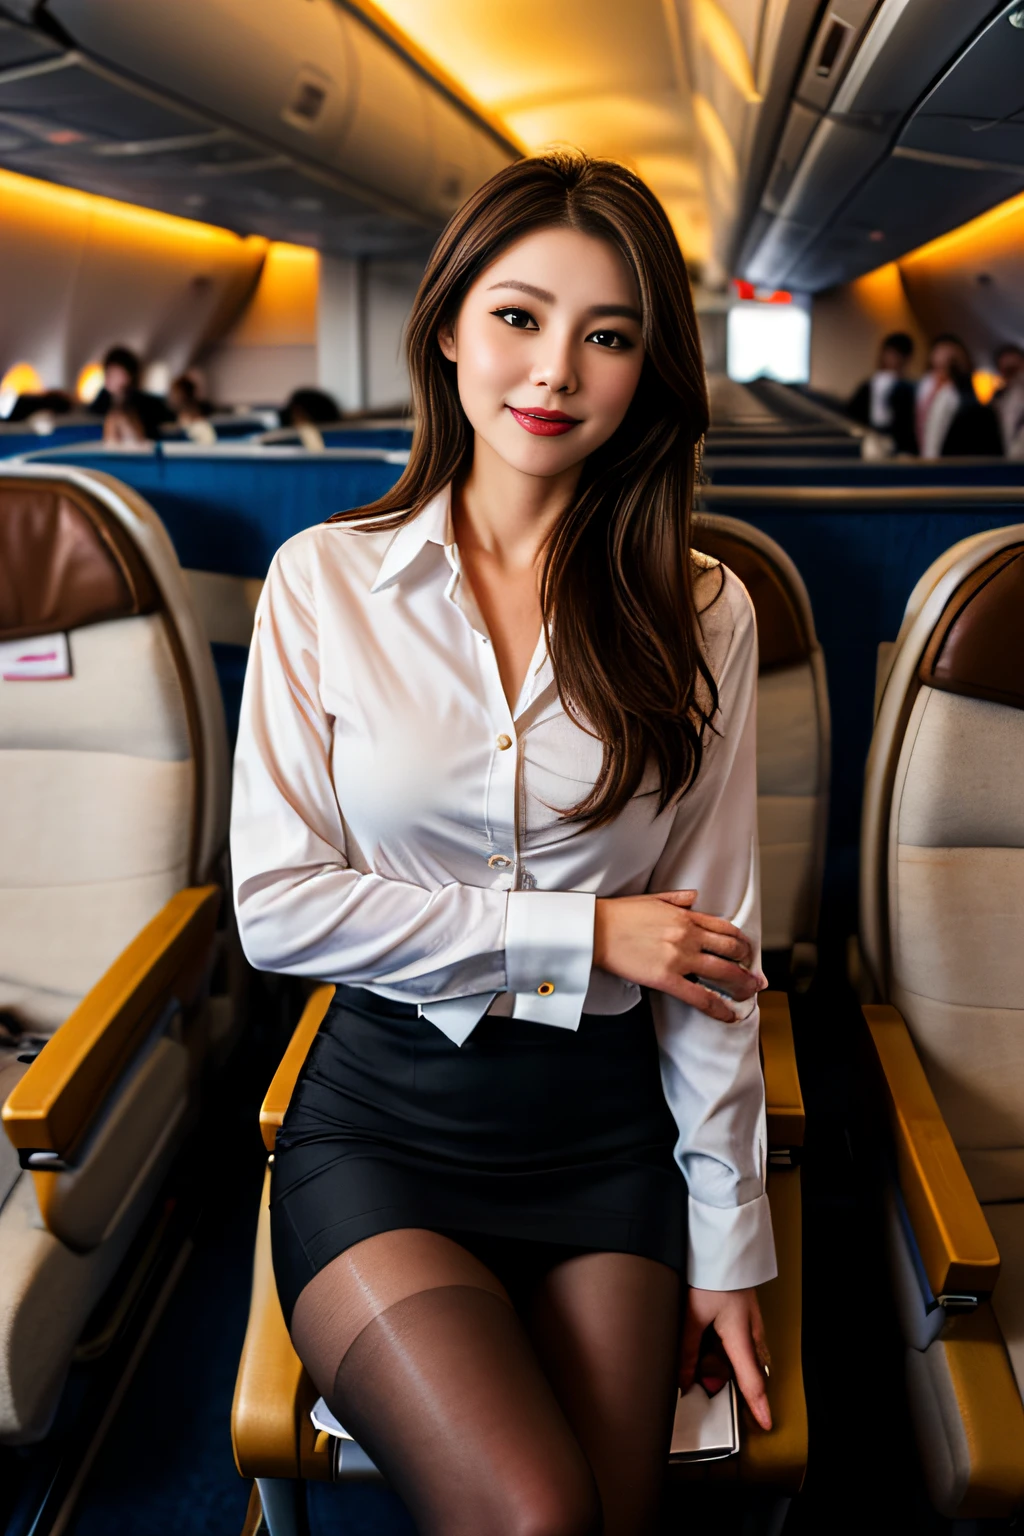 (Best Quality: 1.1), (Realistic: 1.1), (Photography: 1.1), (highly detailed: 1.1), (1womanl), Airline flight attendants, mature, coat, White shirt, Short skirt, black lace stockings, in an airplane, Brown eyes, (Brunette bob gorgeous hair)